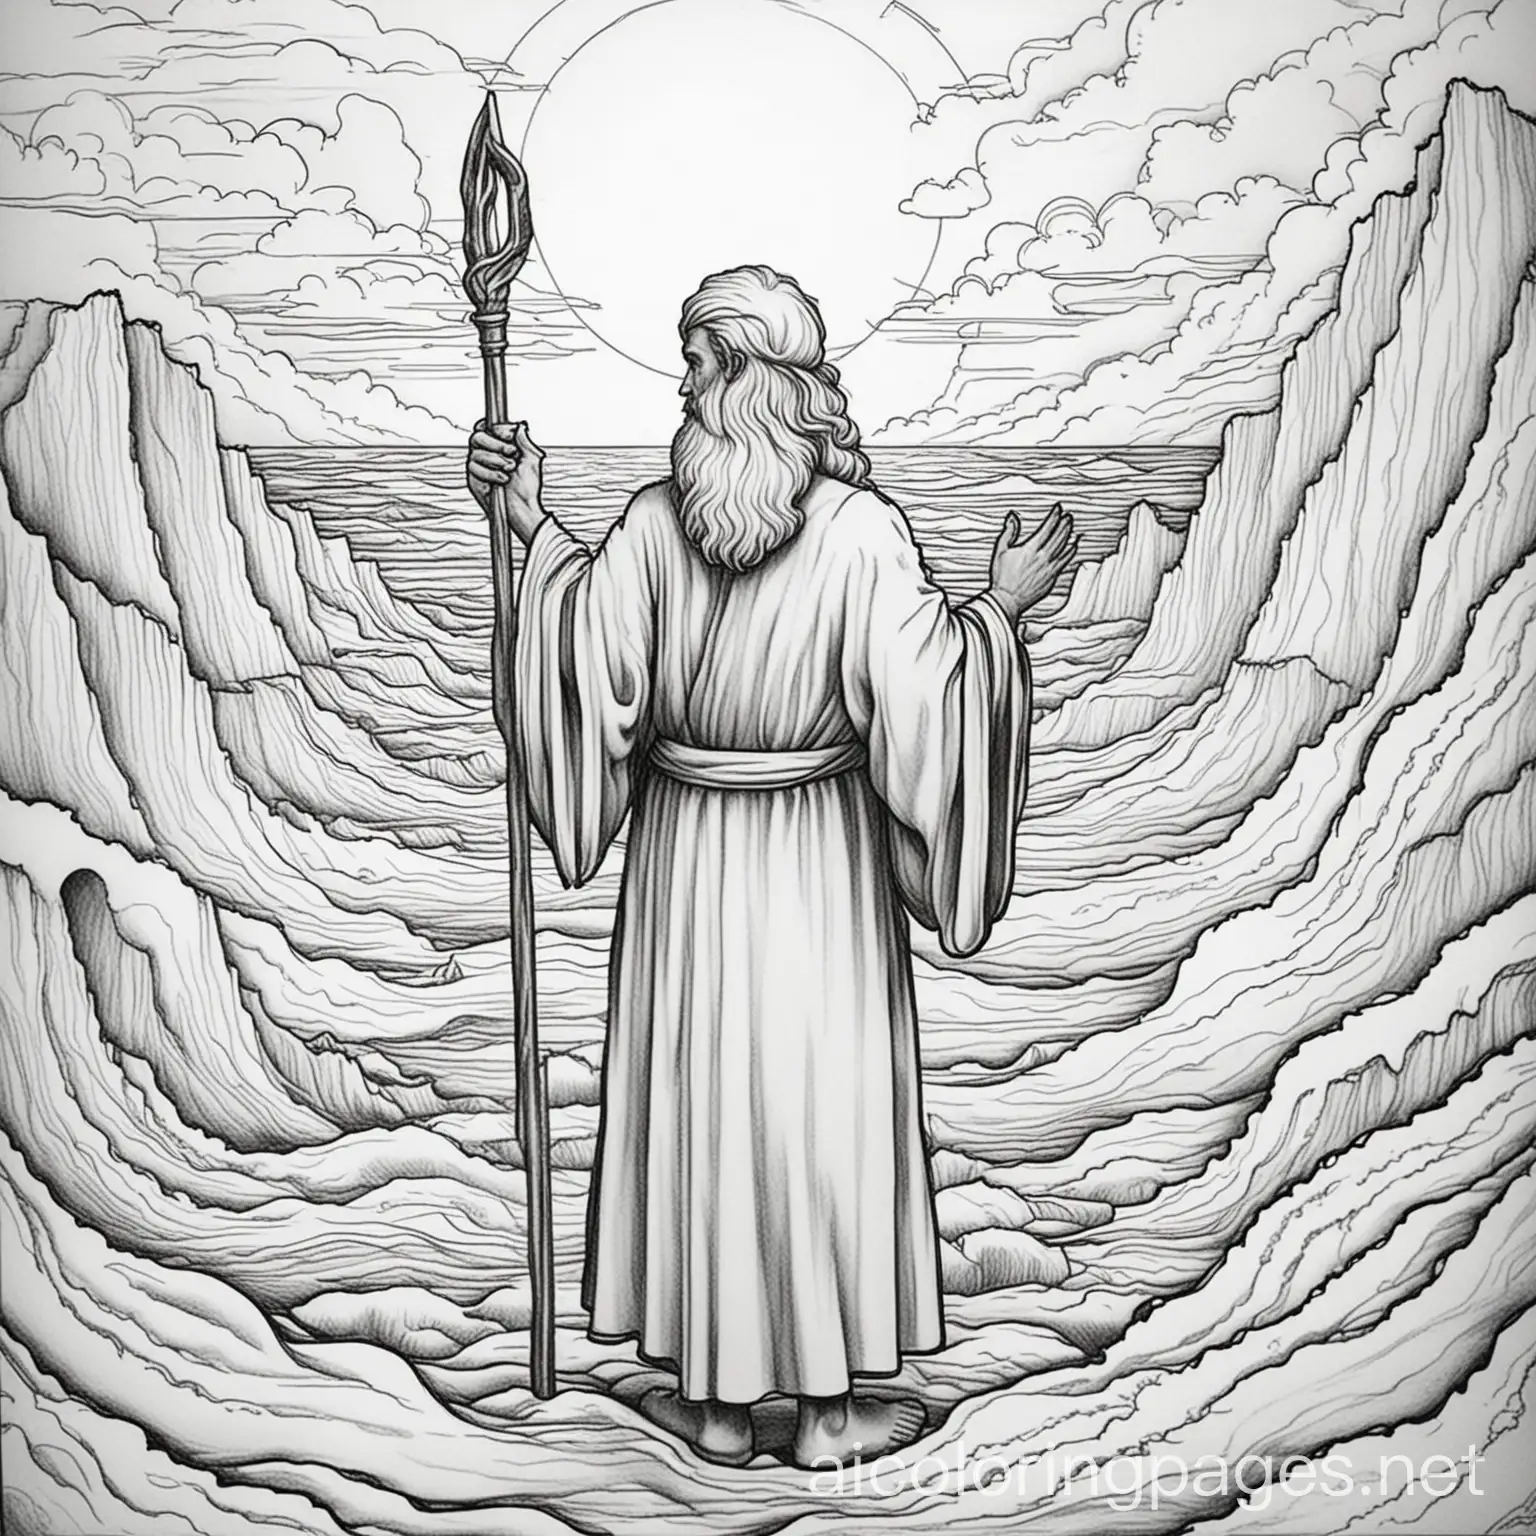 Title: Moses Parting the Red Sea  Create a black and white basic line drawing for young children to be able to color. Background: Start with a wide, horizontally oriented page. Depict a large body of water (the Red Sea) with a dry path in the middle. Moses: Draw Moses in the center of the page. He should be an older man with a long beard, wearing traditional ancient robes. He should be holding a staff in his right hand.  Miracle Scene: draw the waters parting with sea animals in the walls of water. Nature Elements: Include clouds in the sky to give depth to the scene.  Coloring Details: Use outlines so that children can color the image., Coloring Page, black and white, line art, white background, Simplicity, Ample White Space. The background of the coloring page is plain white to make it easy for young children to color within the lines. The outlines of all the subjects are easy to distinguish, making it simple for kids to color without too much difficulty